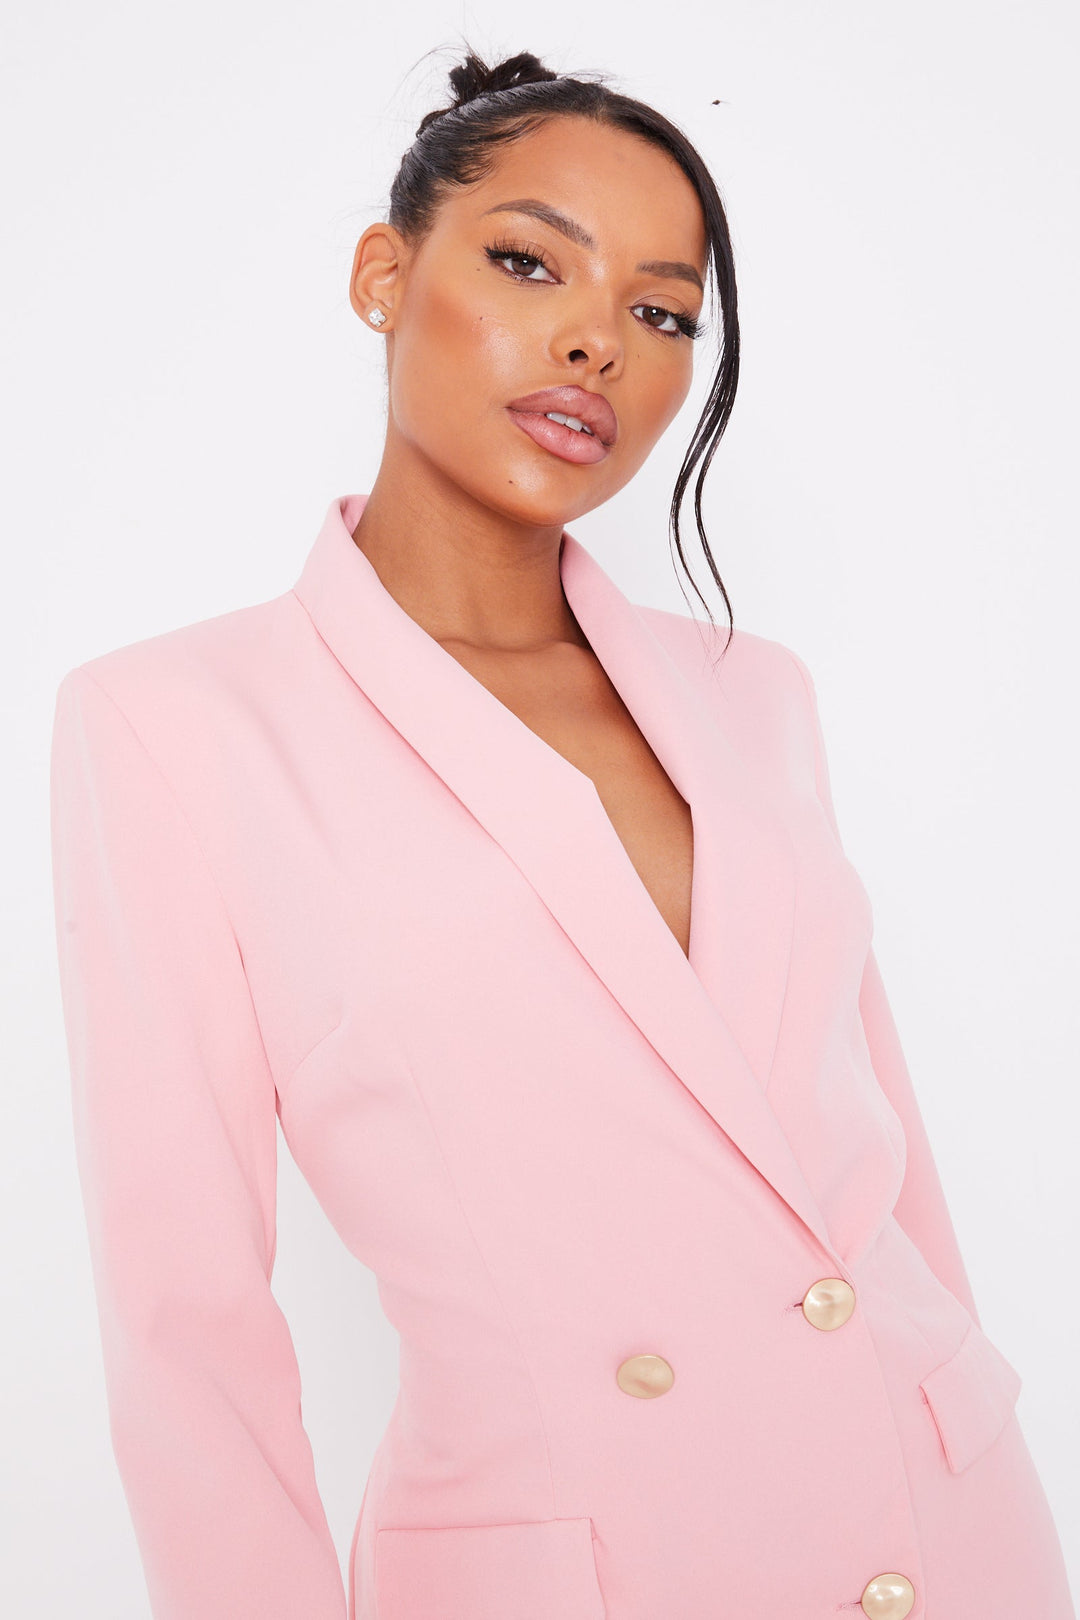 Pink Double Breasted Gold Button Blazer Dress